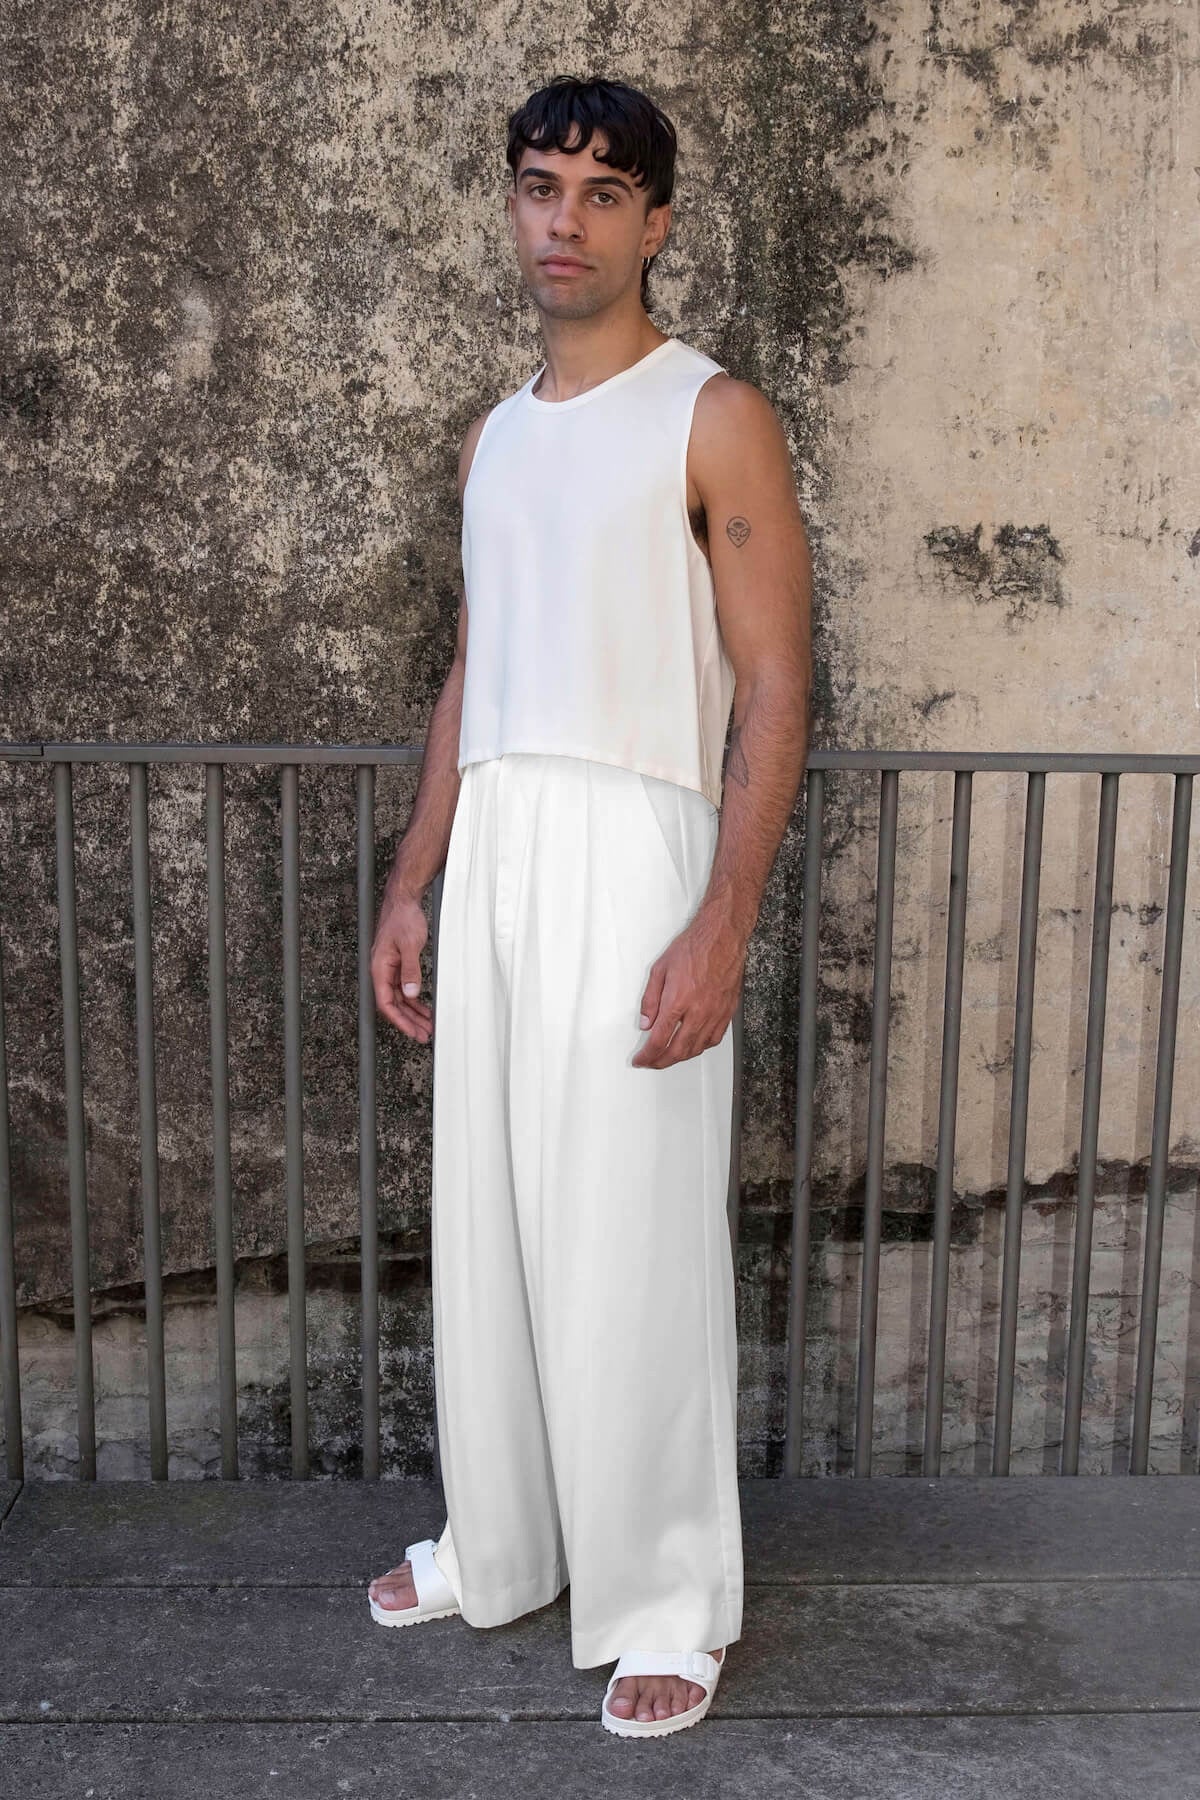 Men's high waisted pants in white and men's cropped top